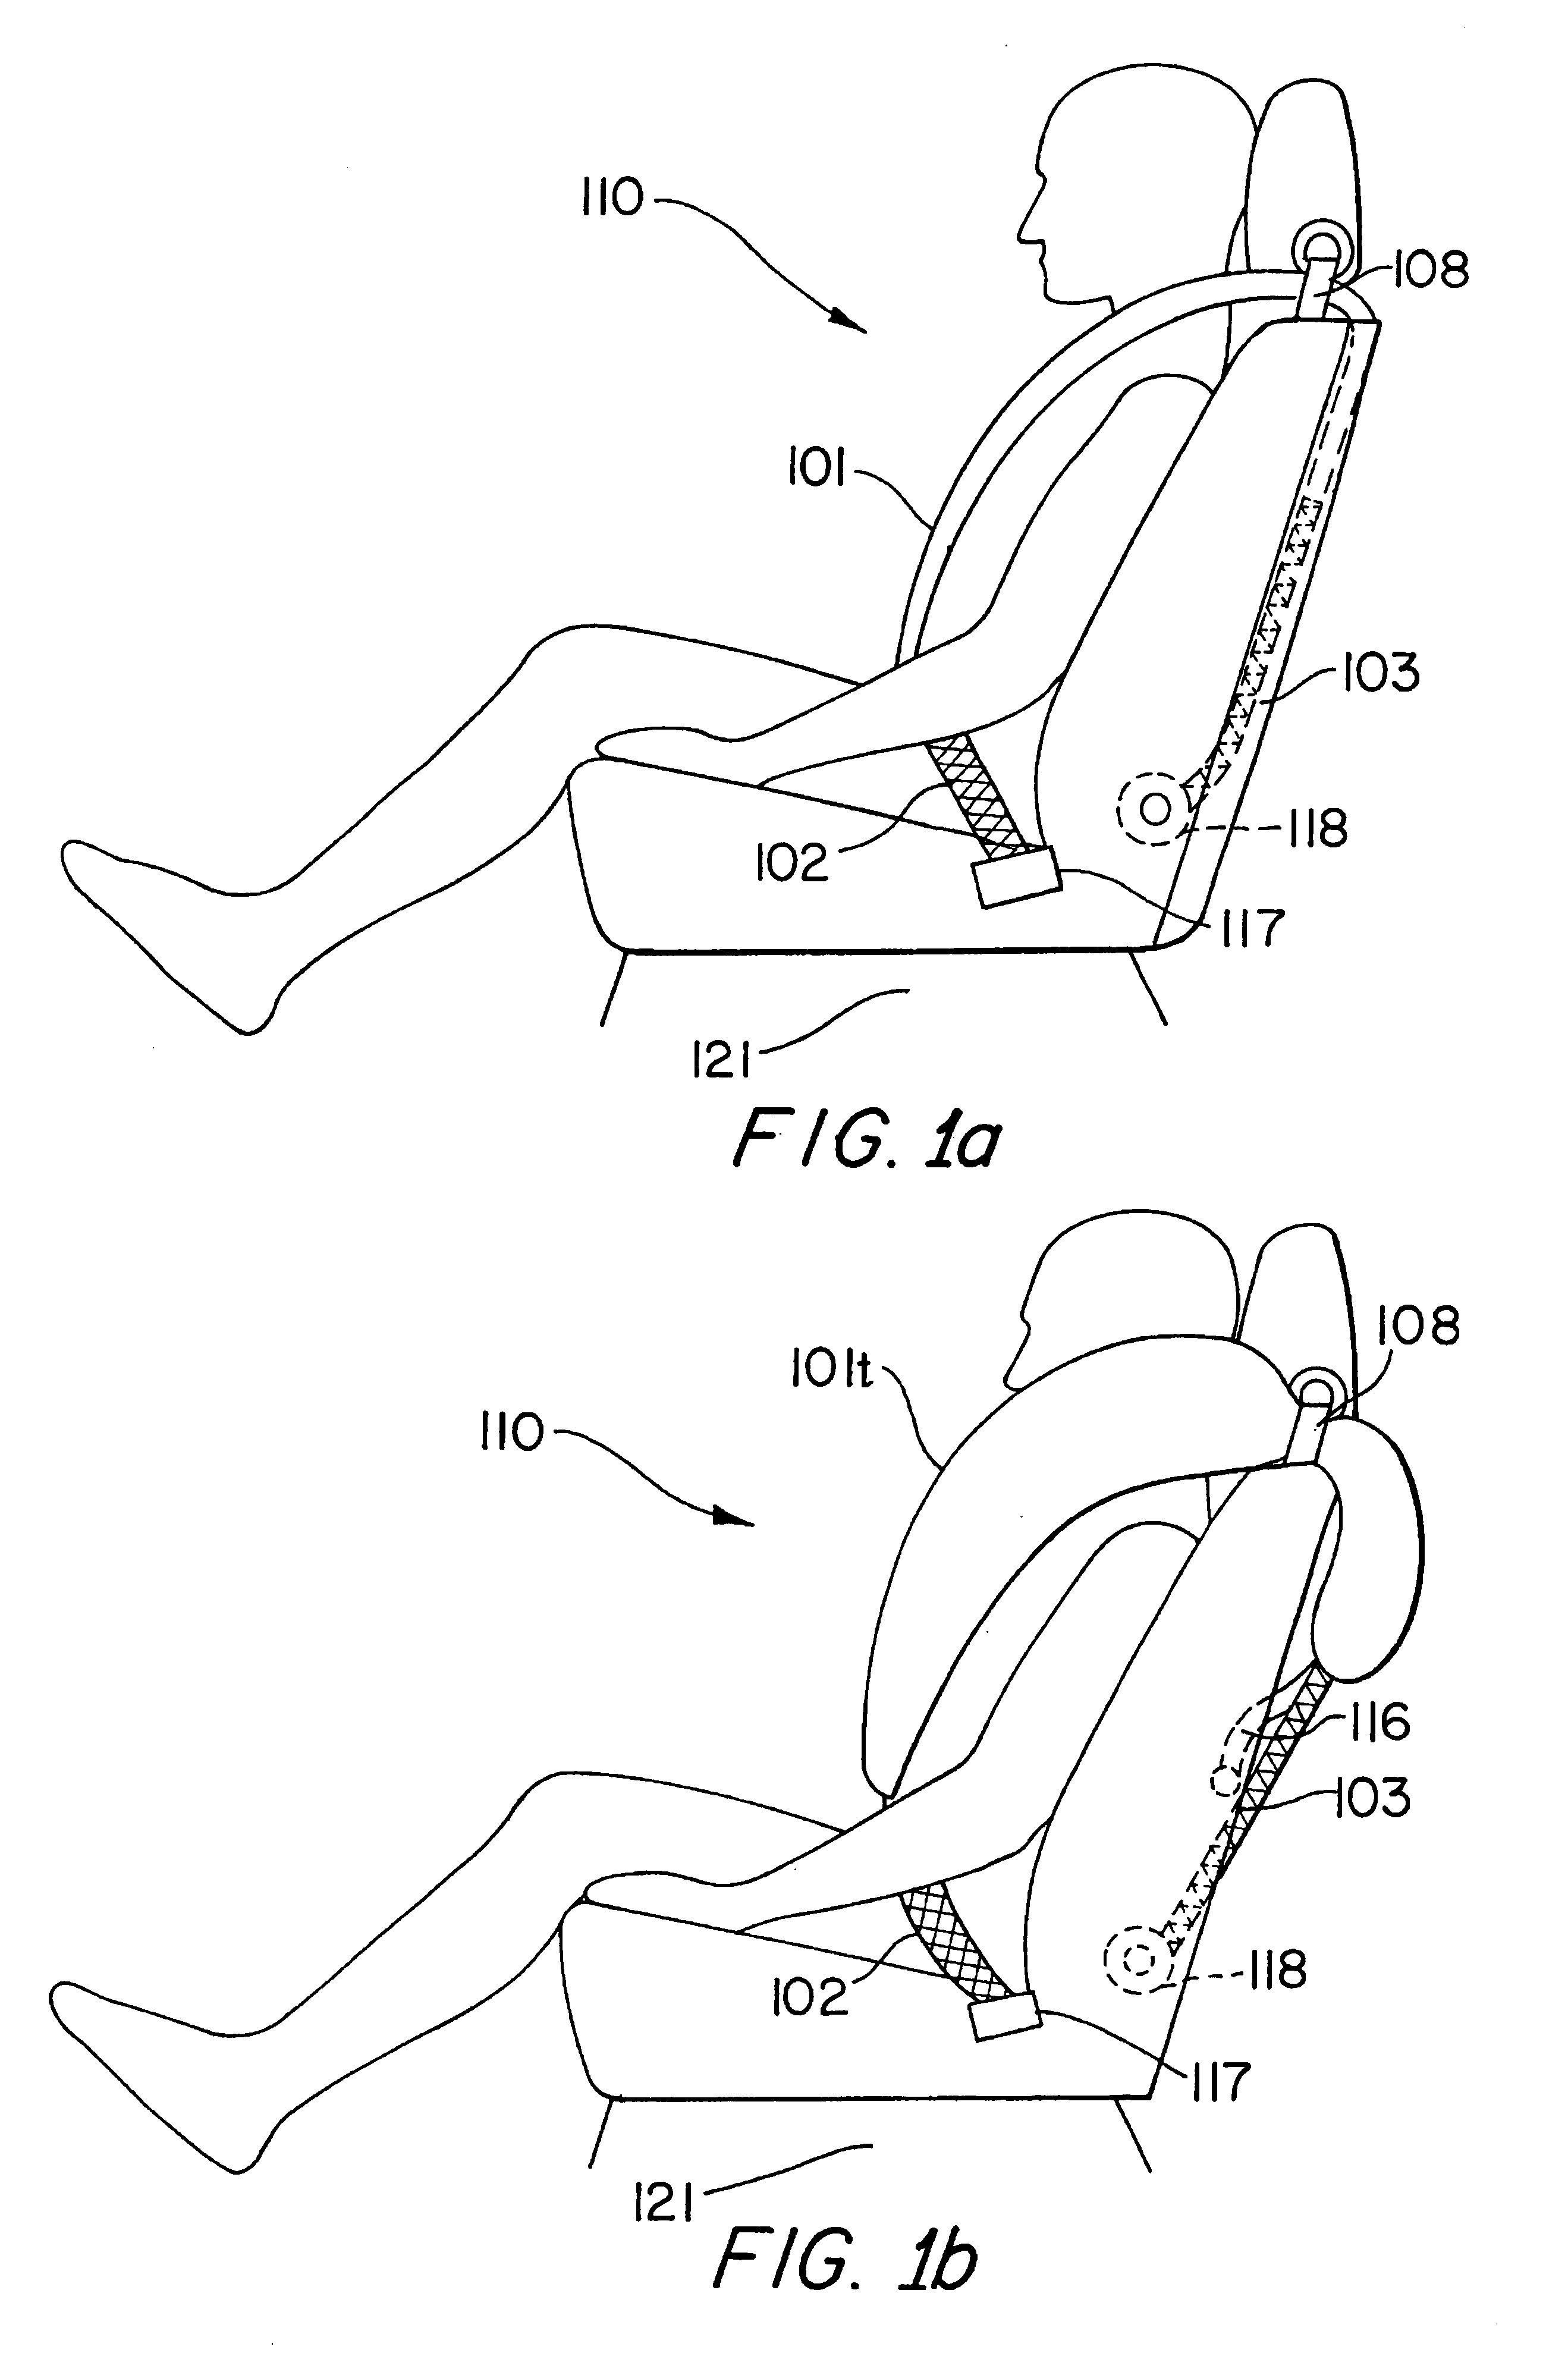 Inflatable tubular torso restraint system with pivoting upper anchor point attachment